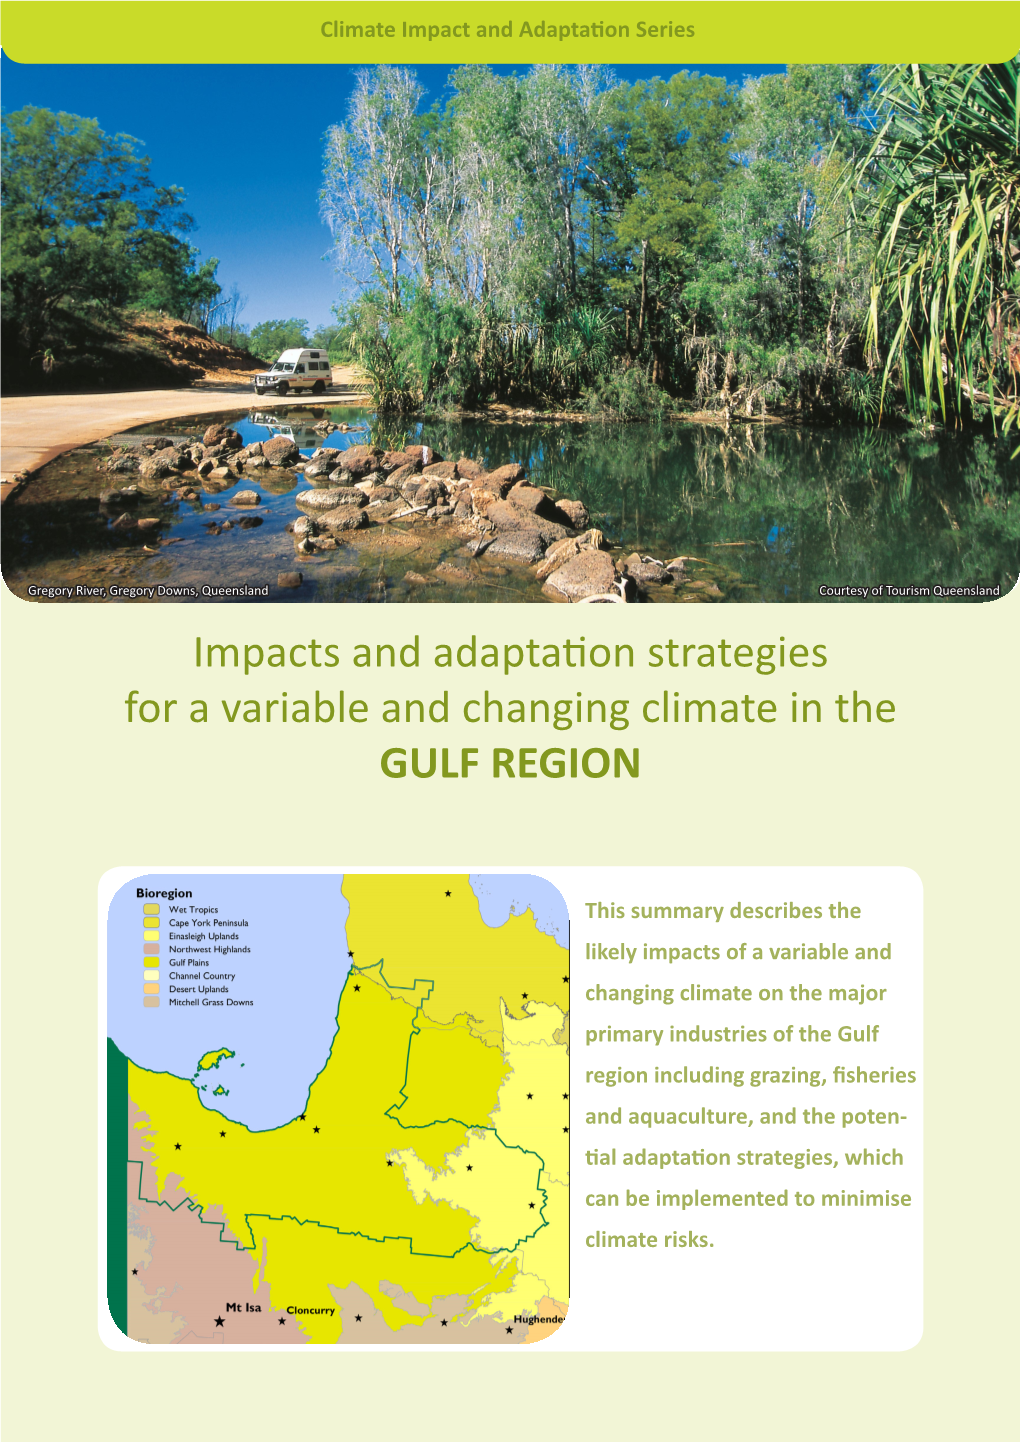 Impacts and Adaptation Strategies for a Variable and Changing Climate in the GULF REGION